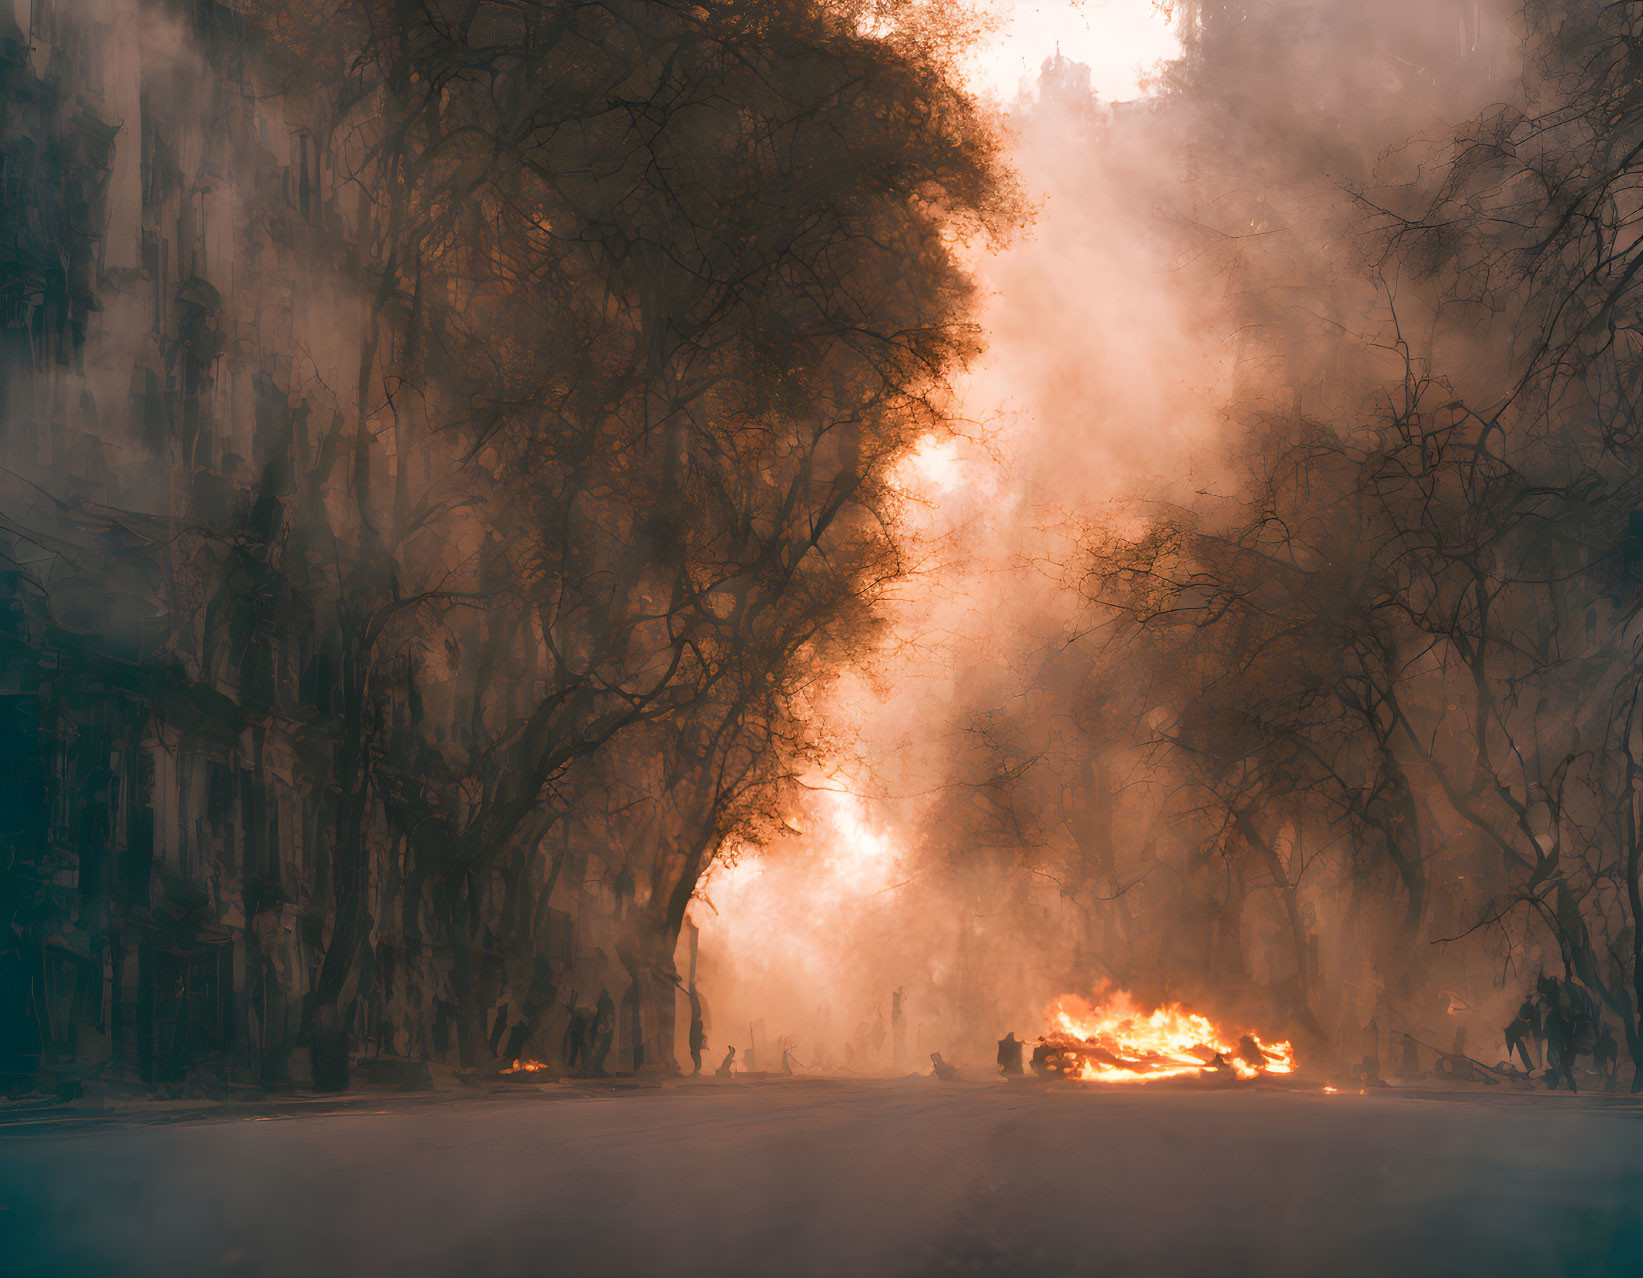 Surreal street scene with mist, people, and fire under trees